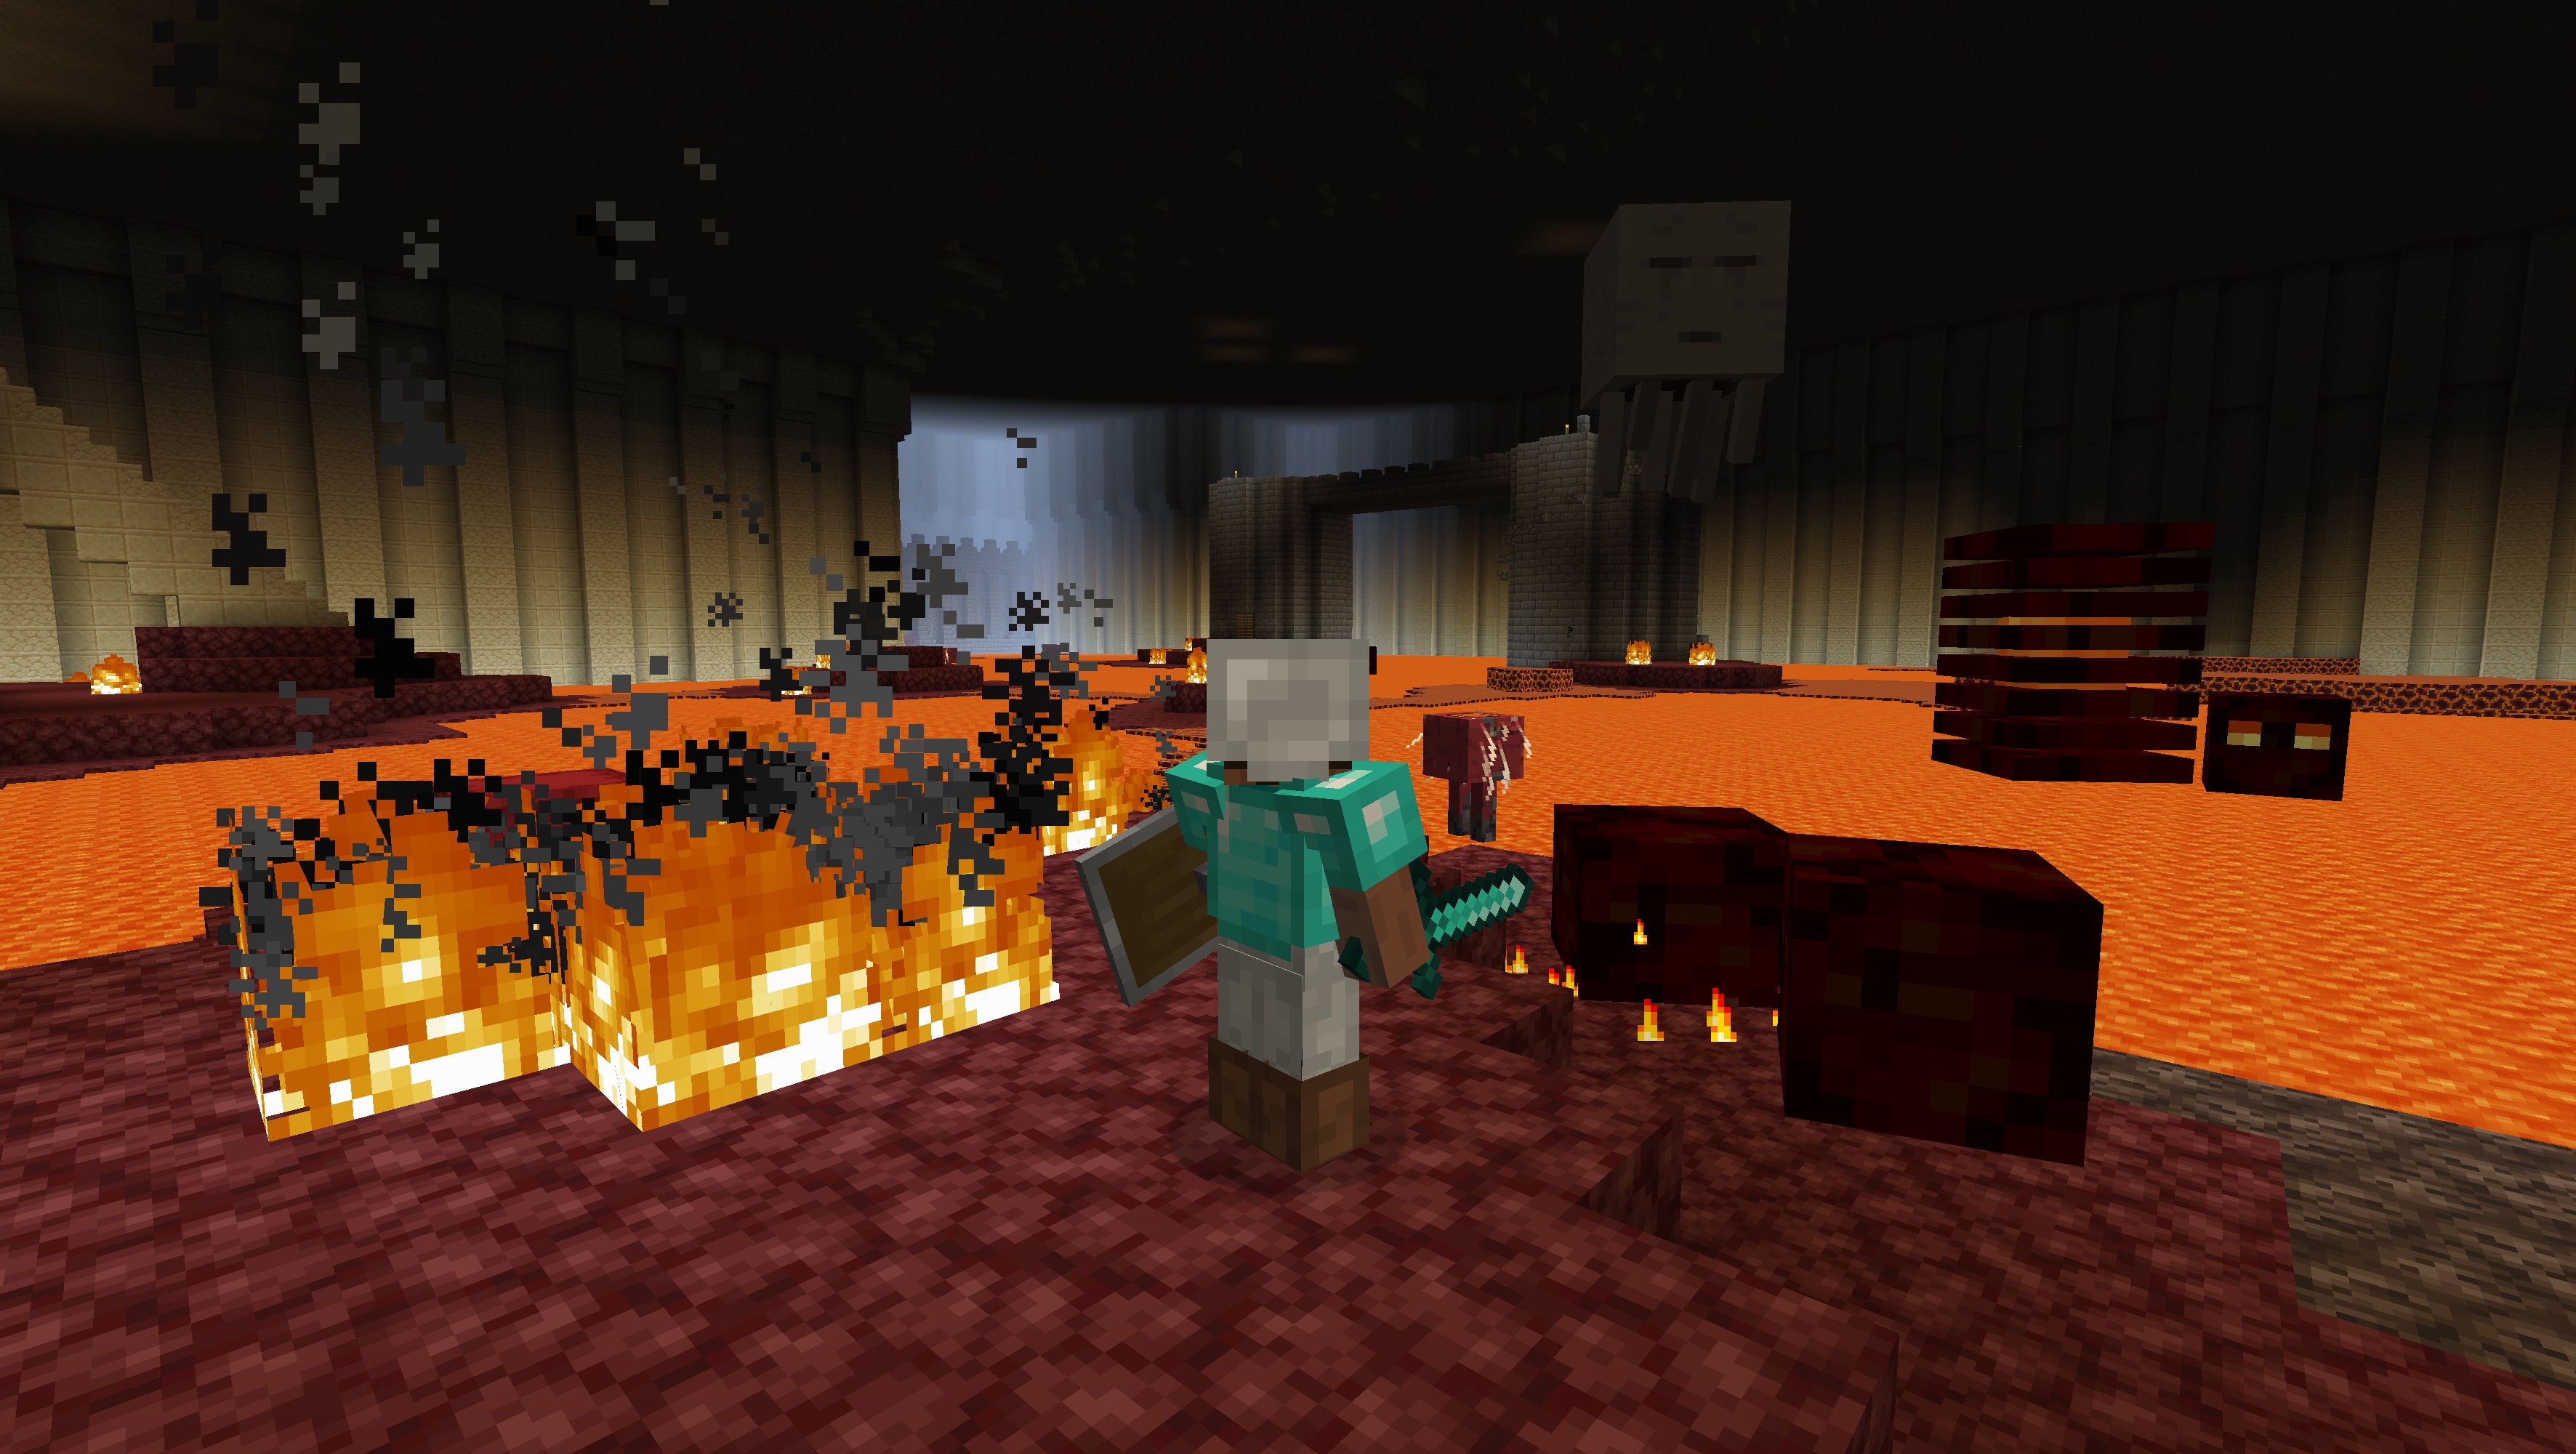 Fire and Lava